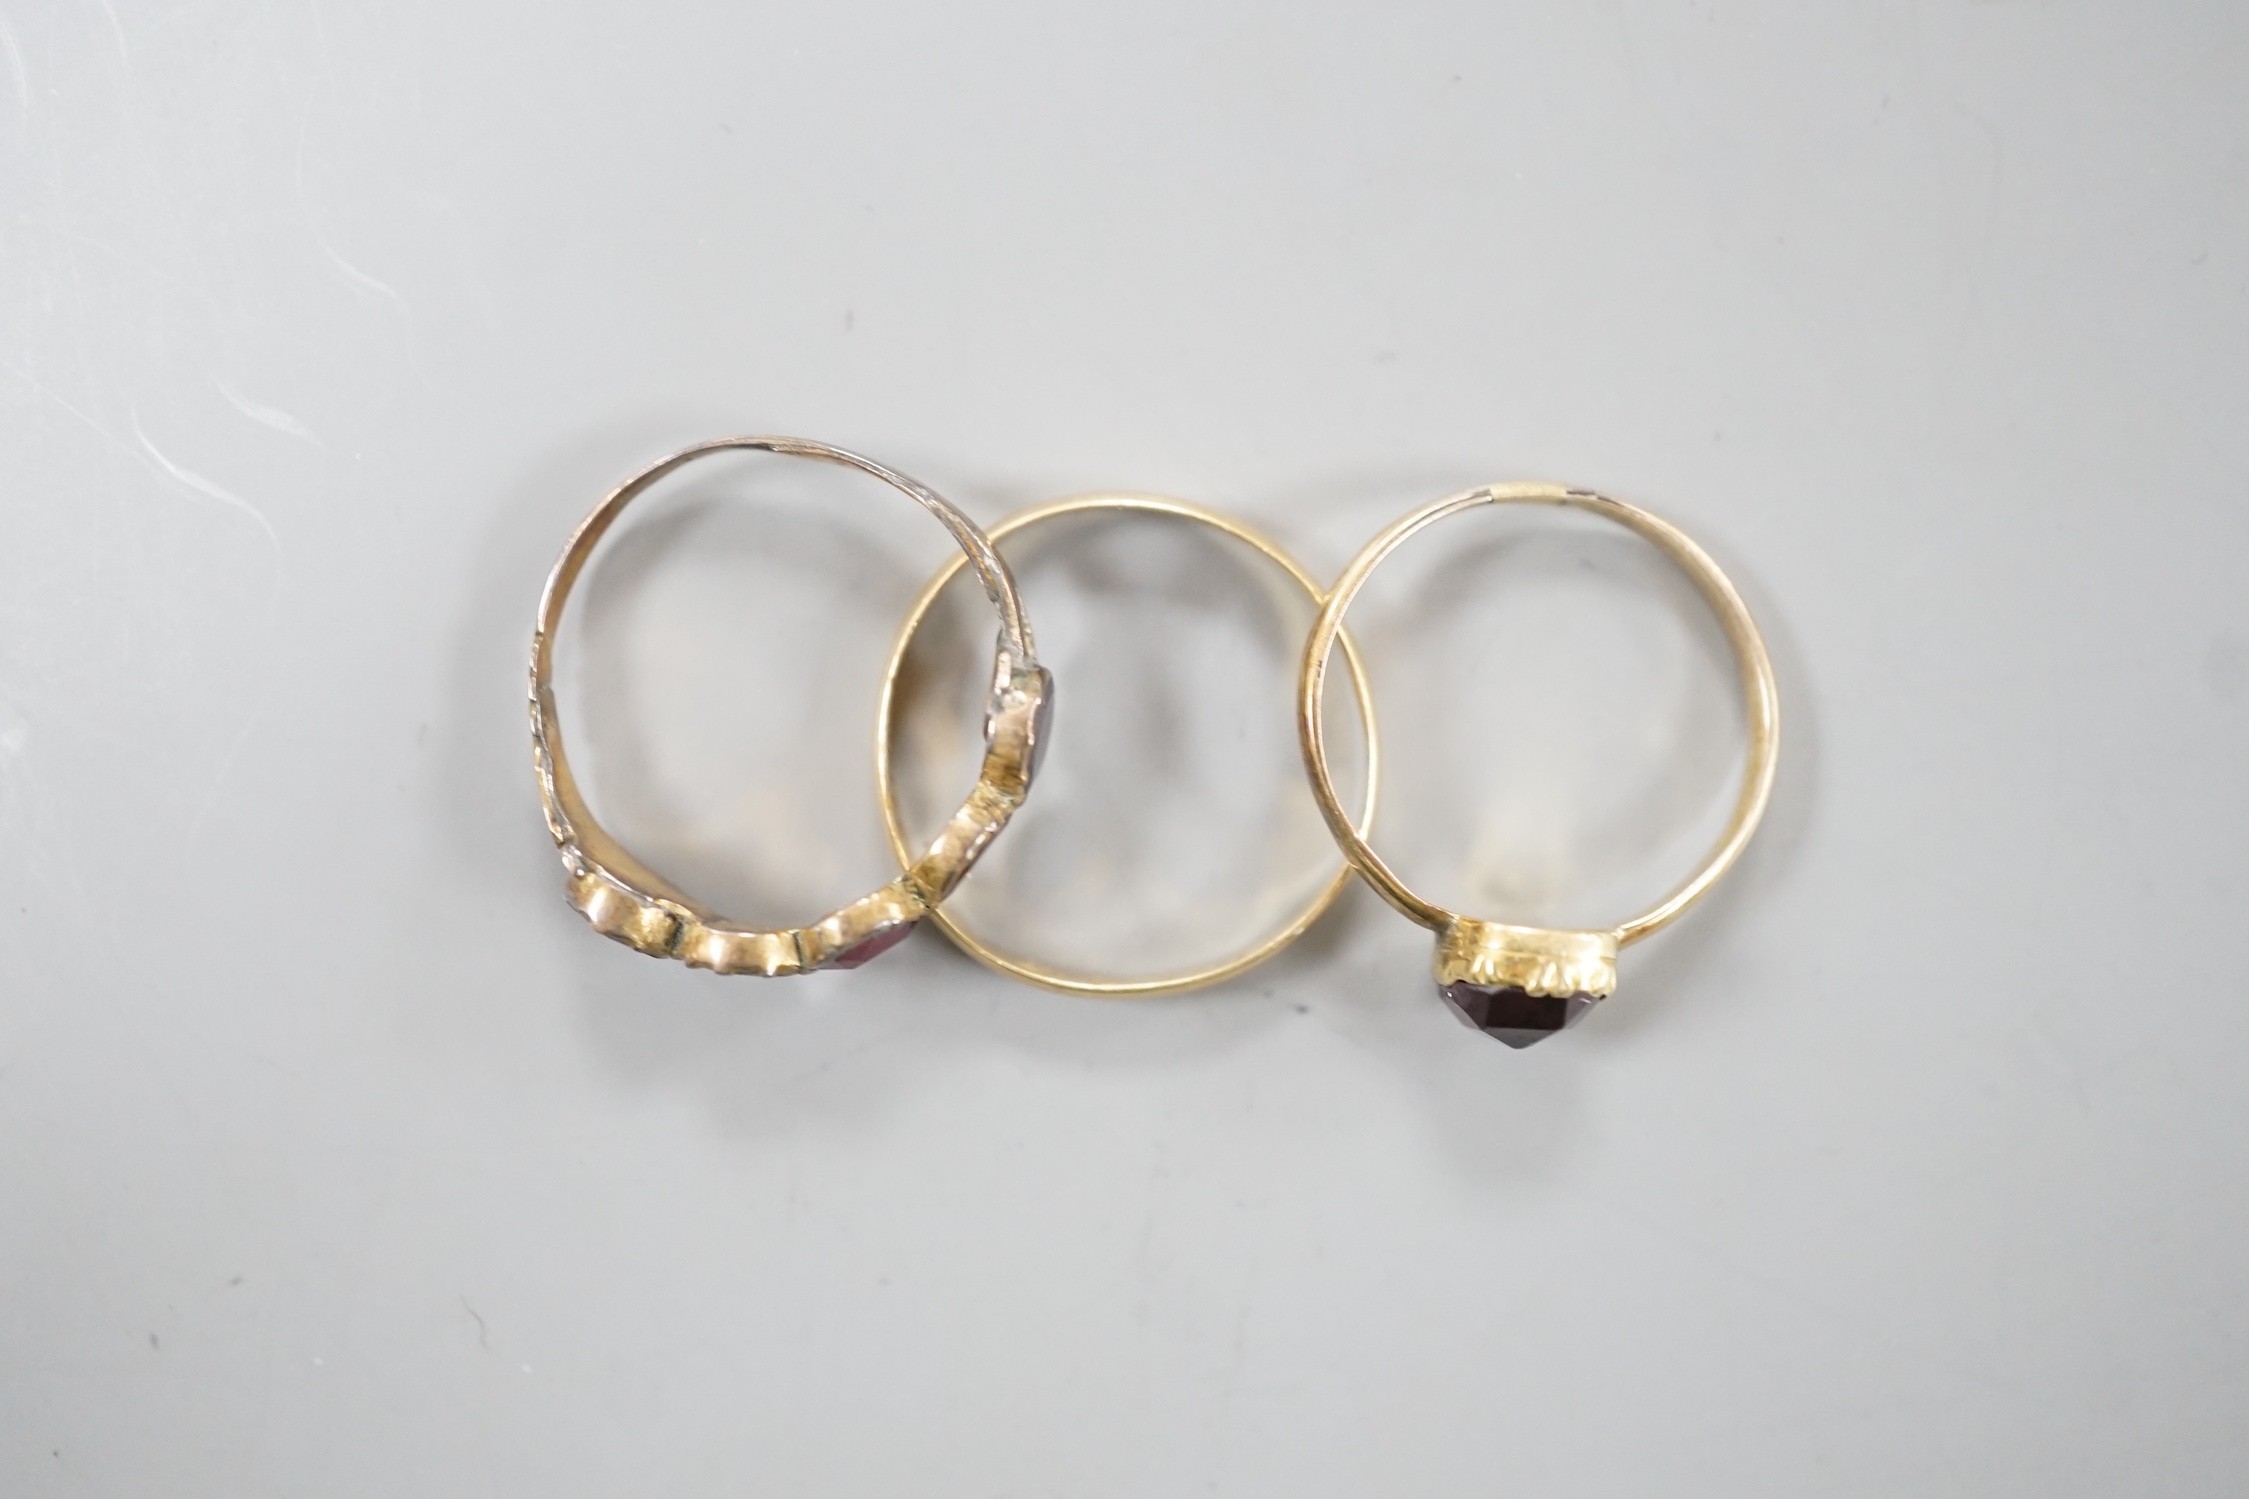 Two 19th century yellow metal and garnet set rings, including five stone half hoop, size J and single stone, size G/H and a yellow metal posy ring inscribed 'Vertue Gaineth Glory', gross weight 2.9 grams.